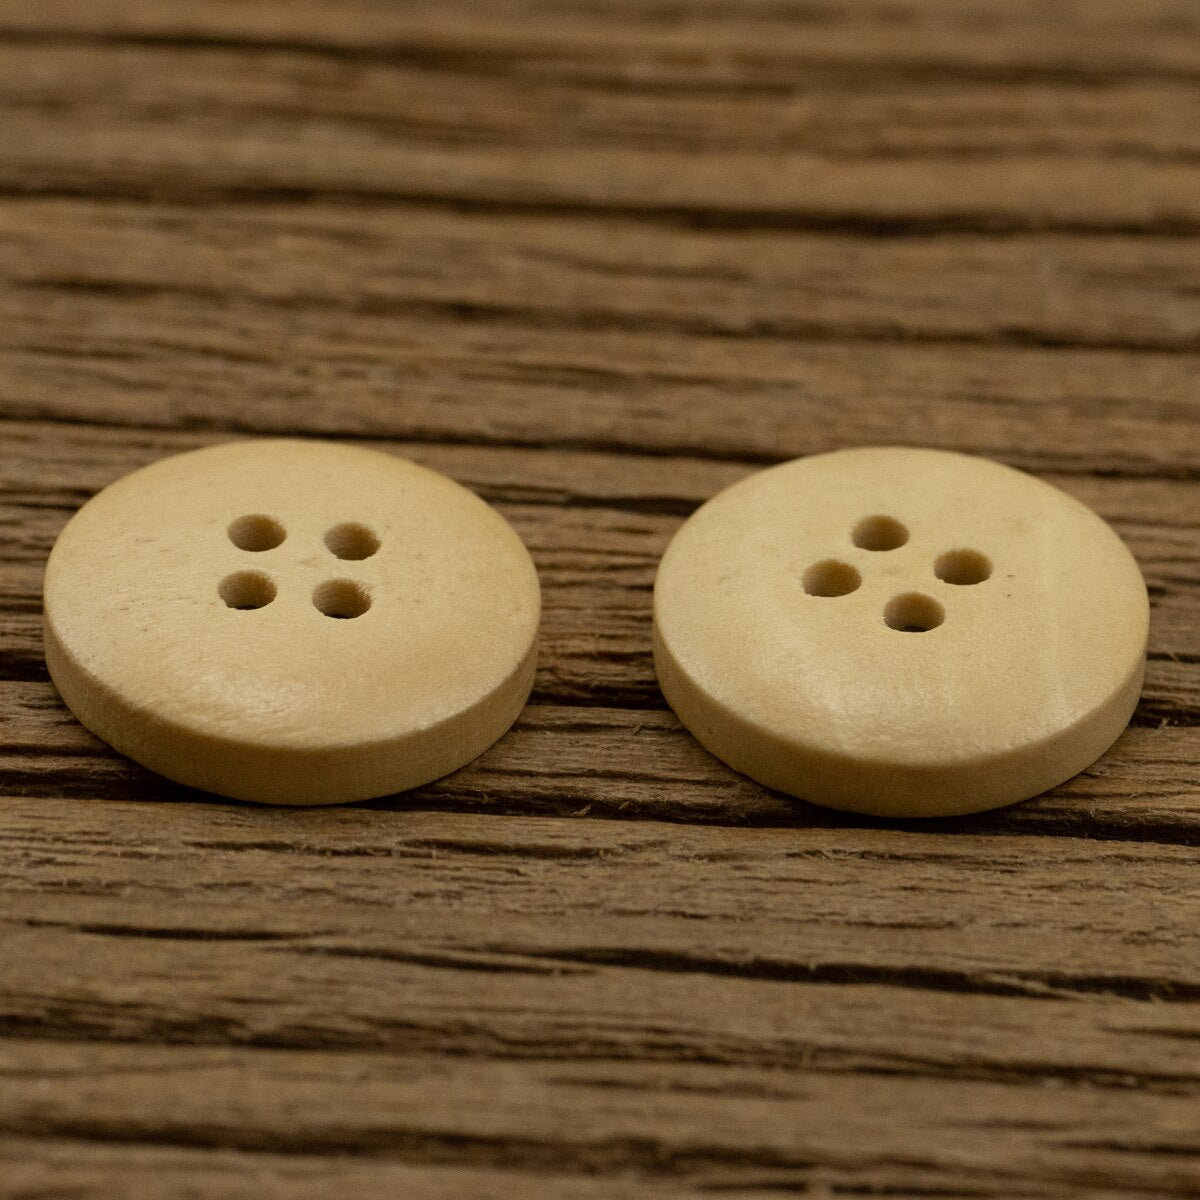 10pcs 4 Hole Wooden Button 11.5mm-20mm Sewing Scrapbooking Clothing Crafts Gift